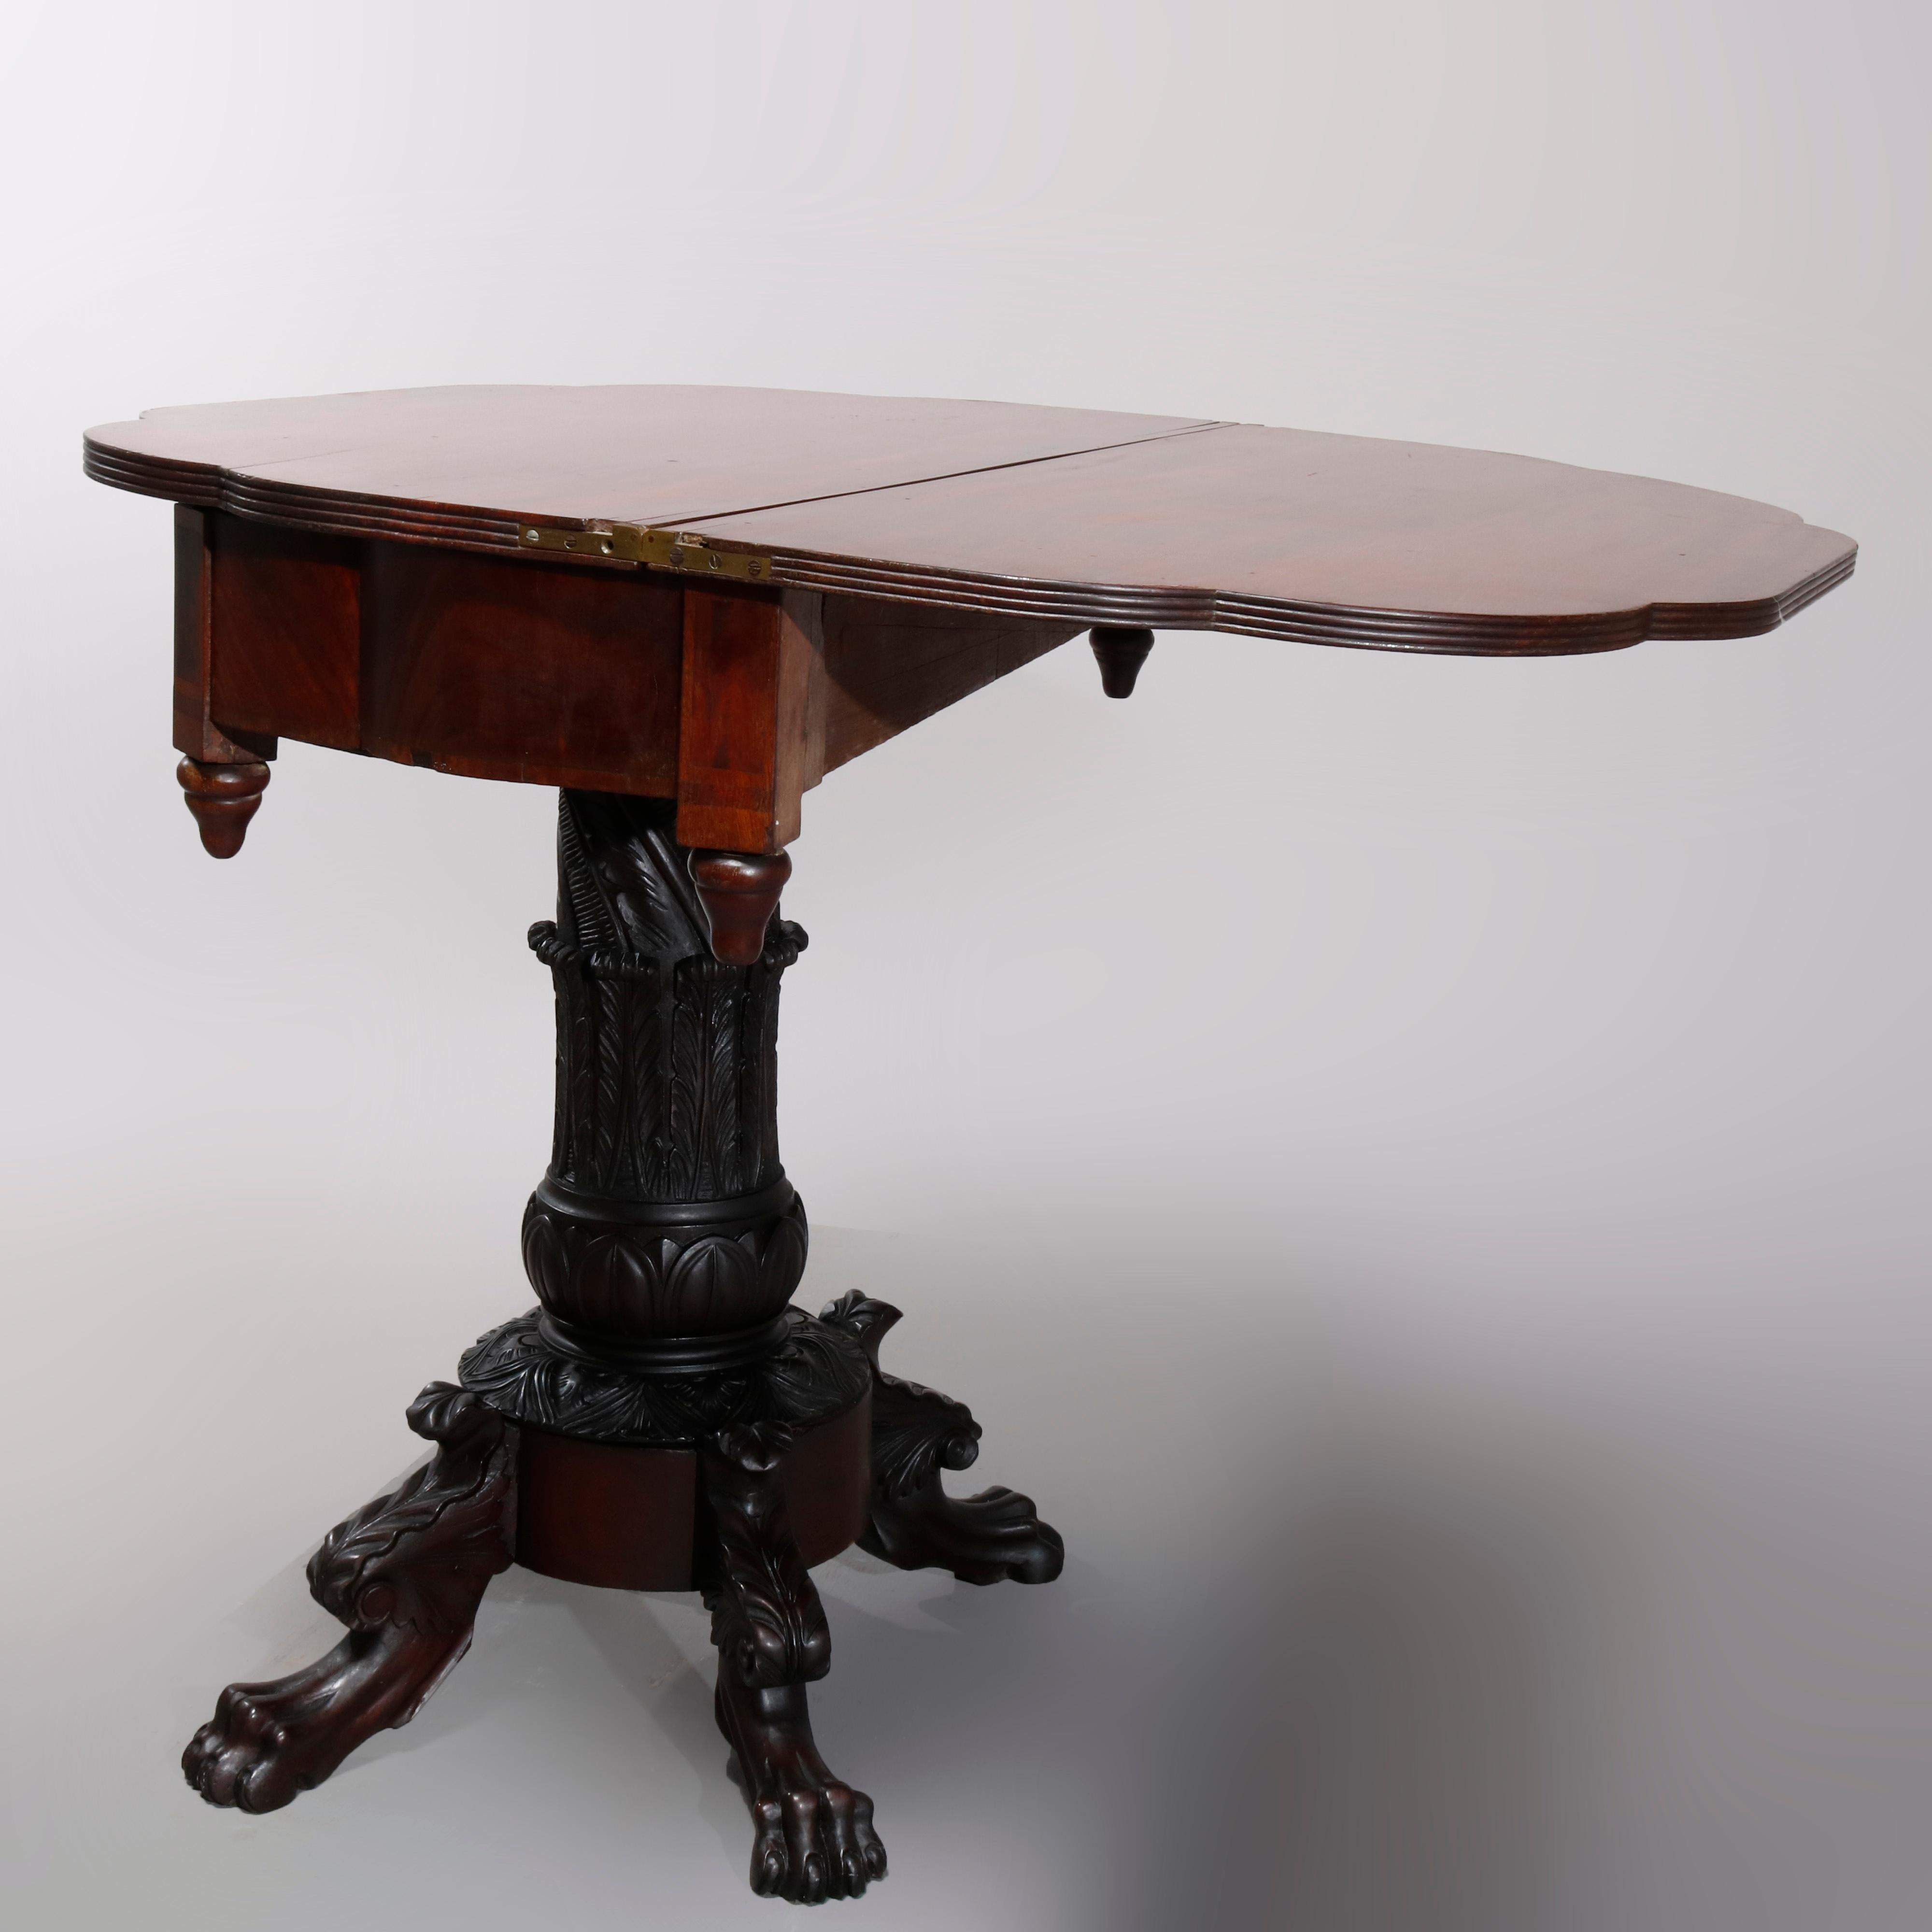 Metal Antique American Empire Deeply Carved Flame Mahogany Game Table, circa 1840